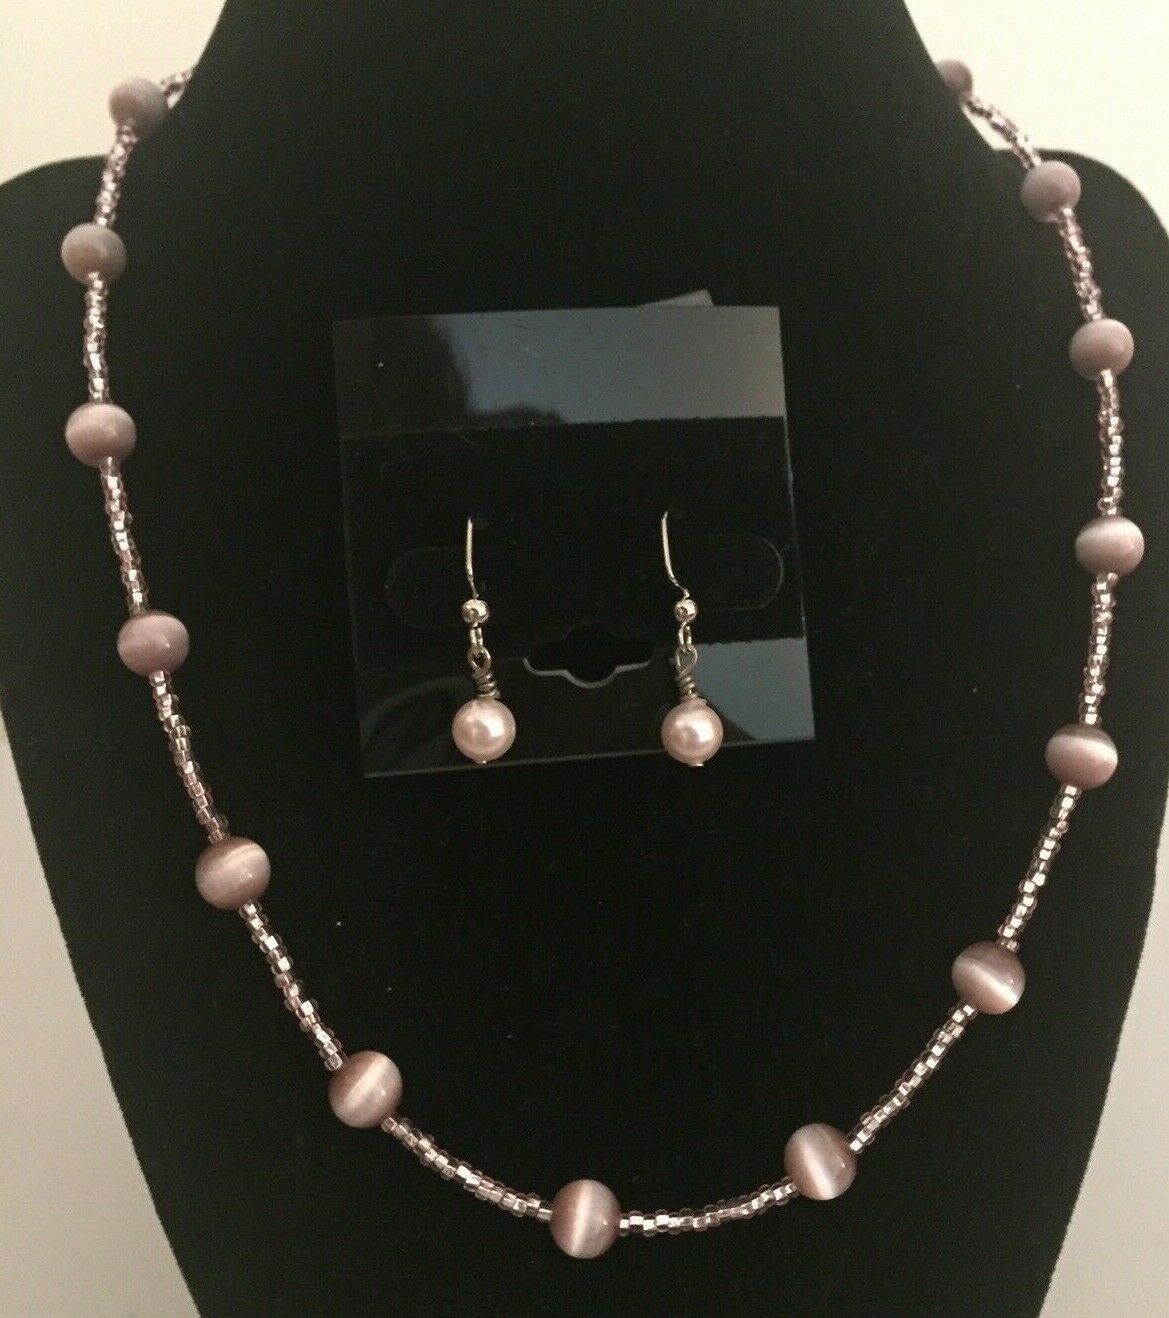 Handcrafted Necklace & Earrings~lt Mauve~beading & Faux Pearl Earrings